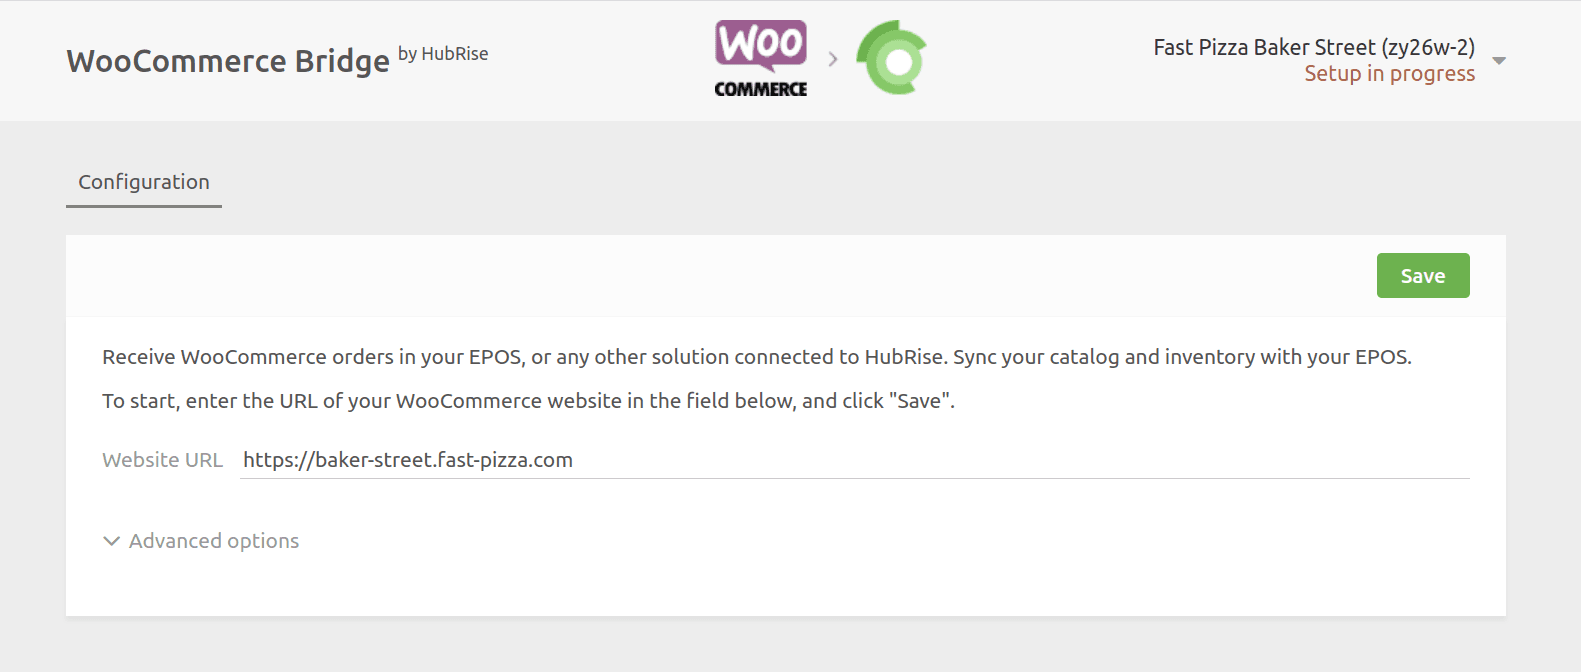 Initial URL page for WooCommerce Bridge